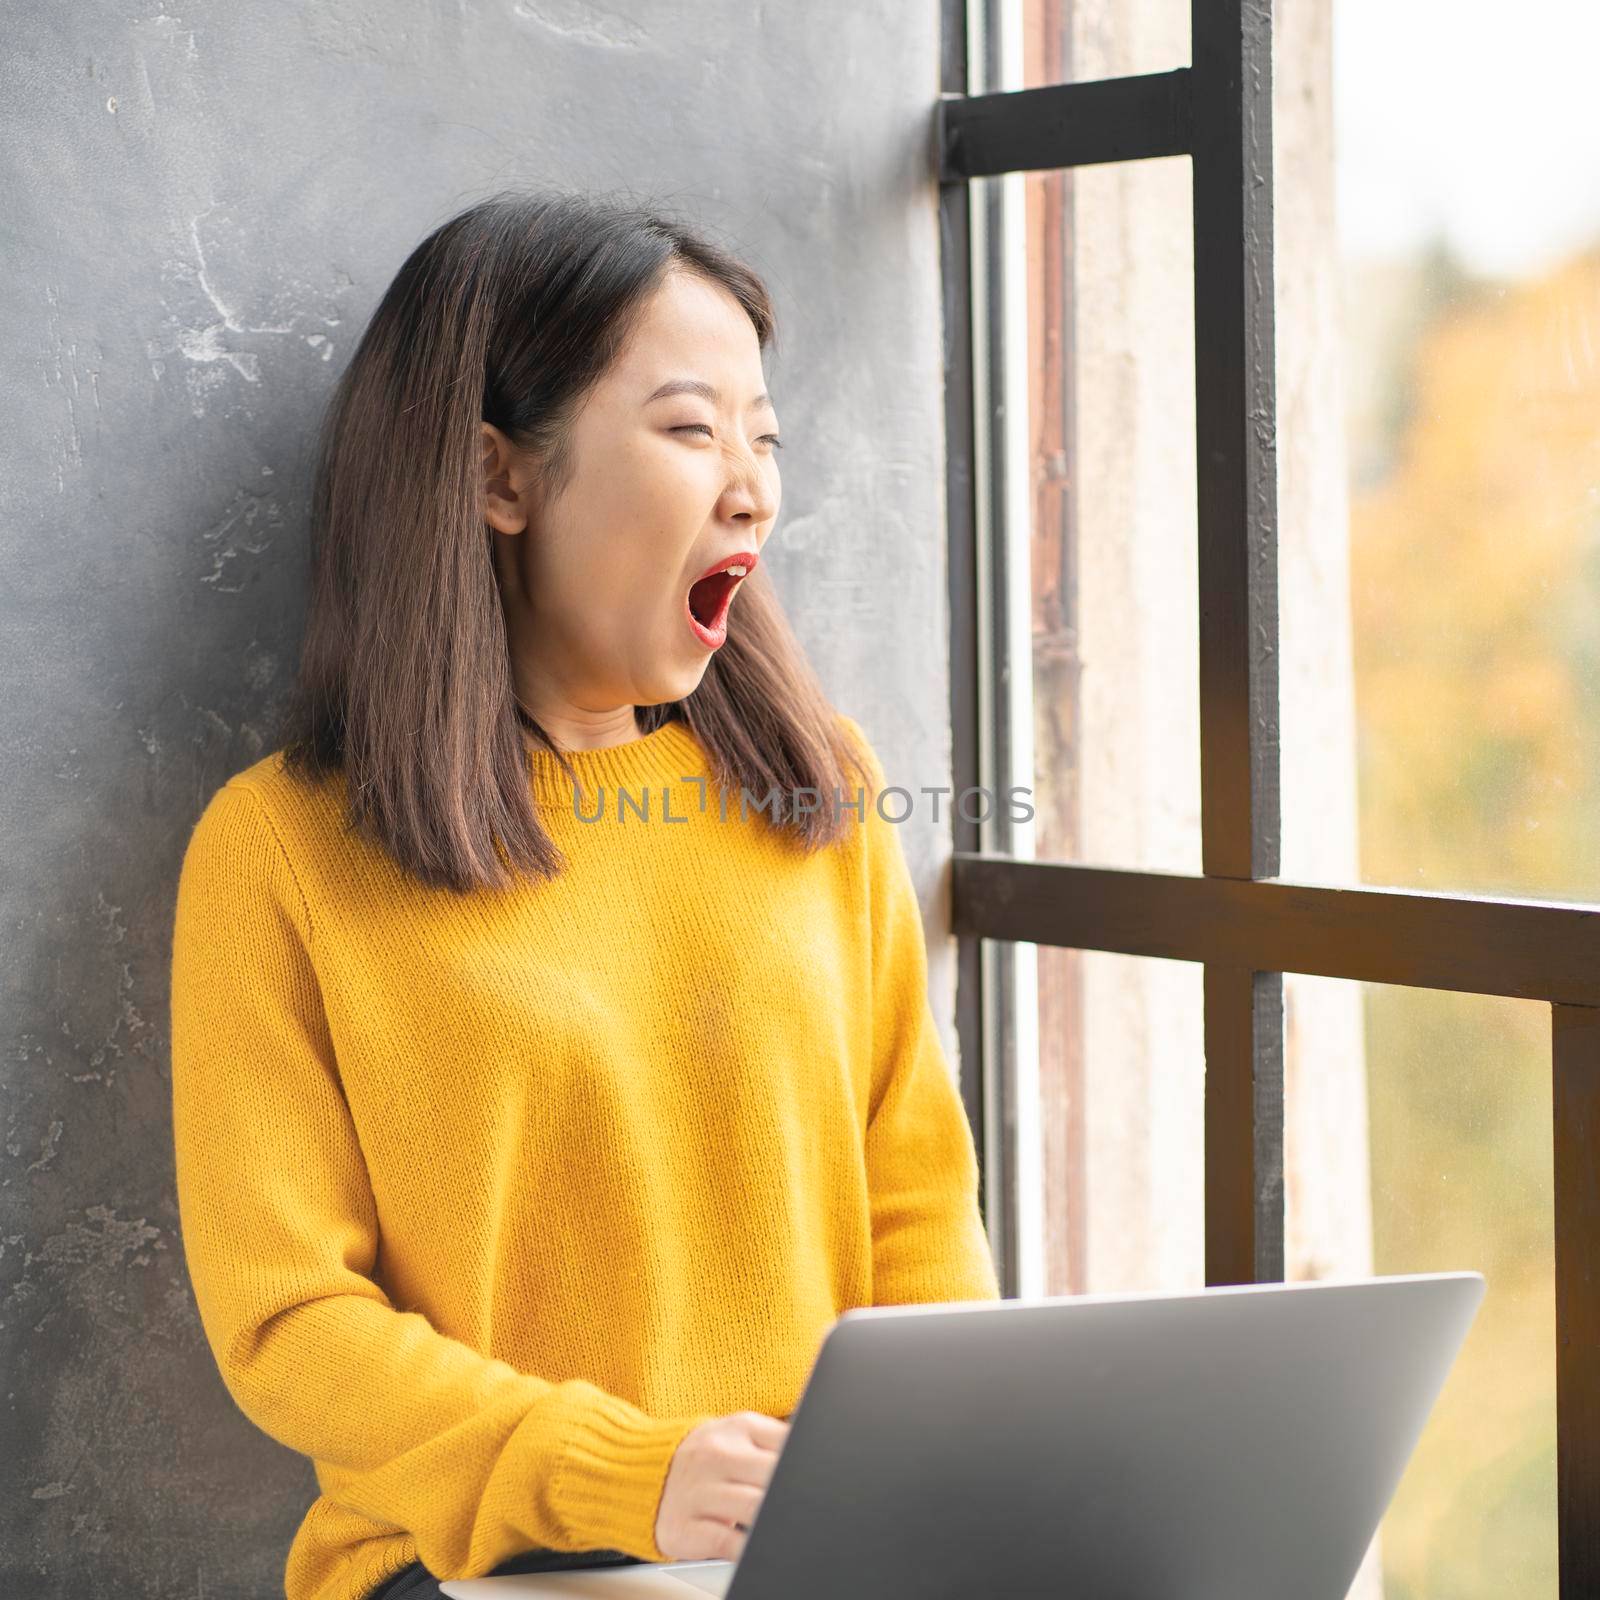 Asian woman yawning due to overworking and exhausting. Young lady in bright yellow jumper by NataBene